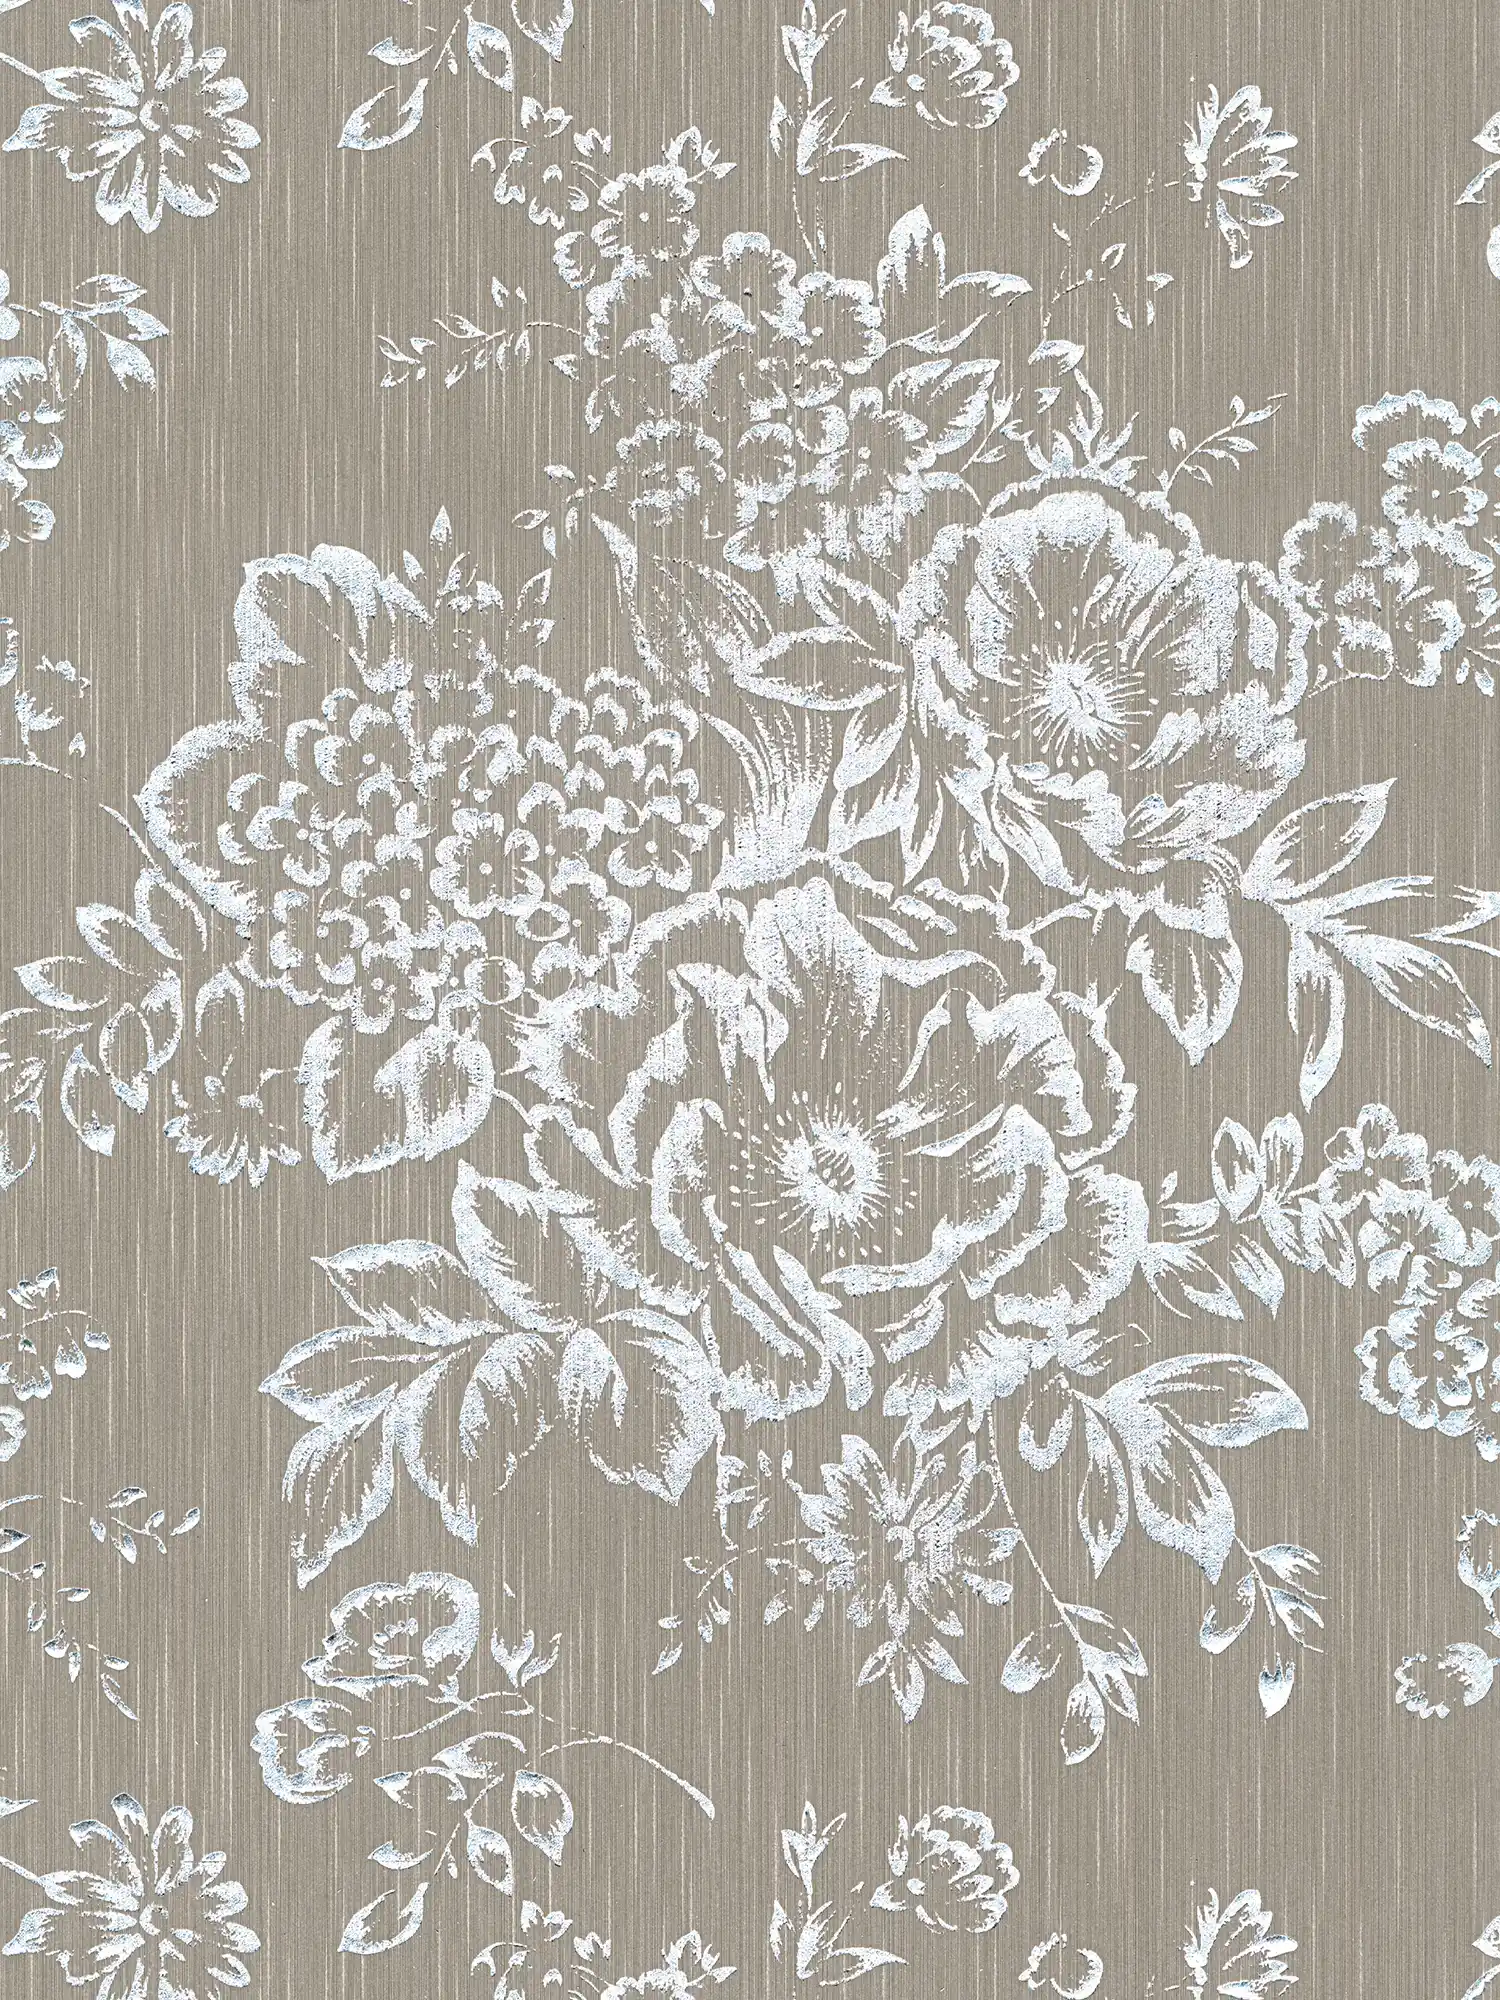 Textured wallpaper with silver floral pattern - silver, brown
